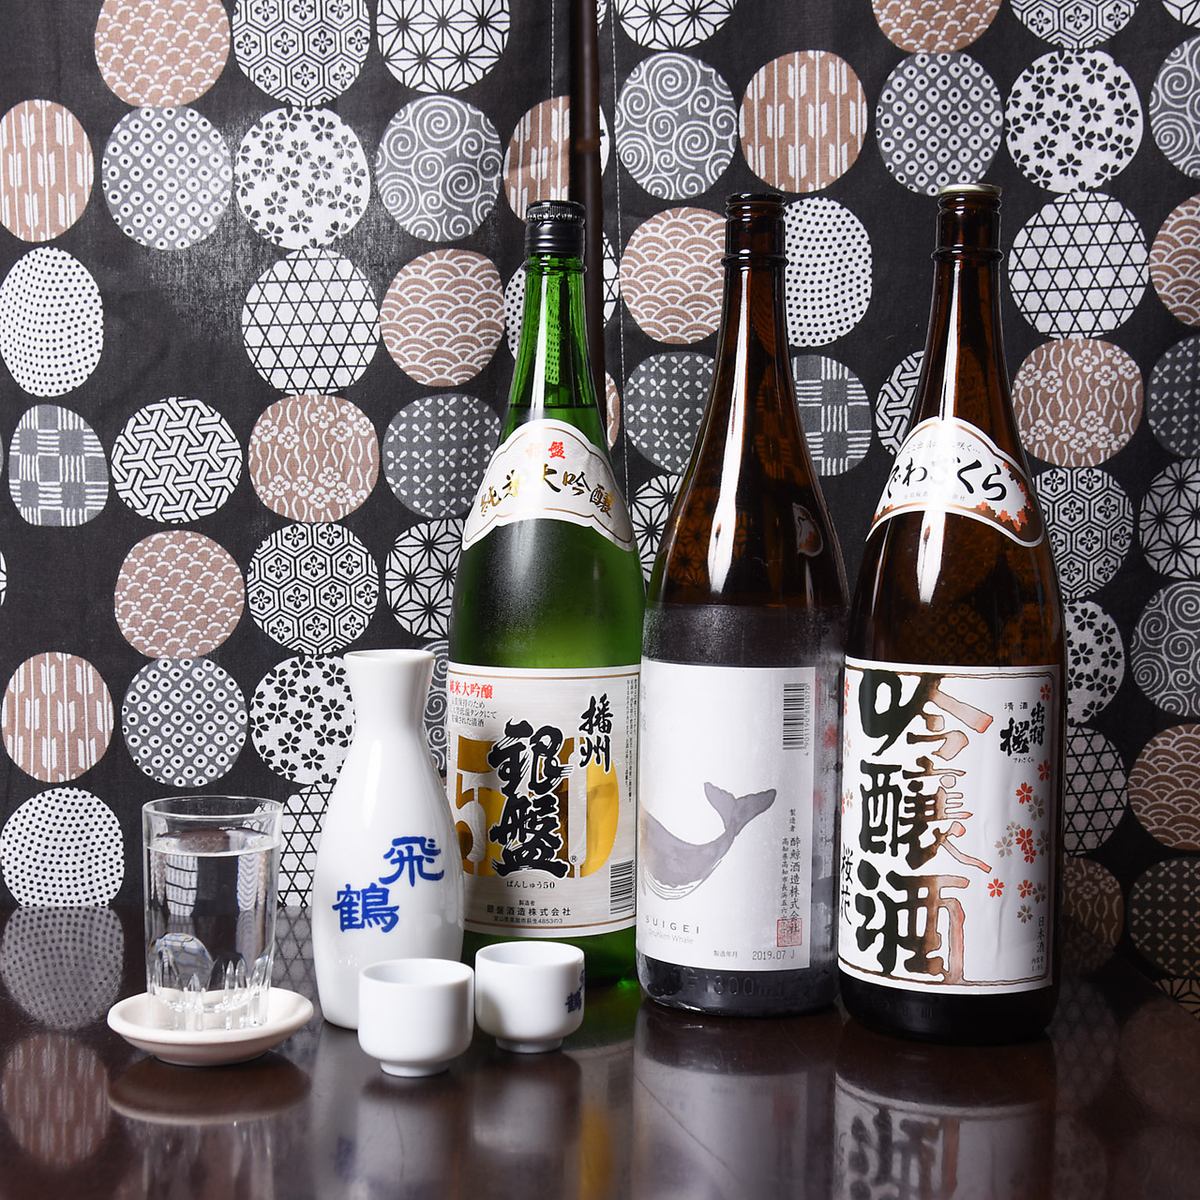 You can enjoy all-you-can-drink drinks including 16 types of local sake and 9 types of whiskey!